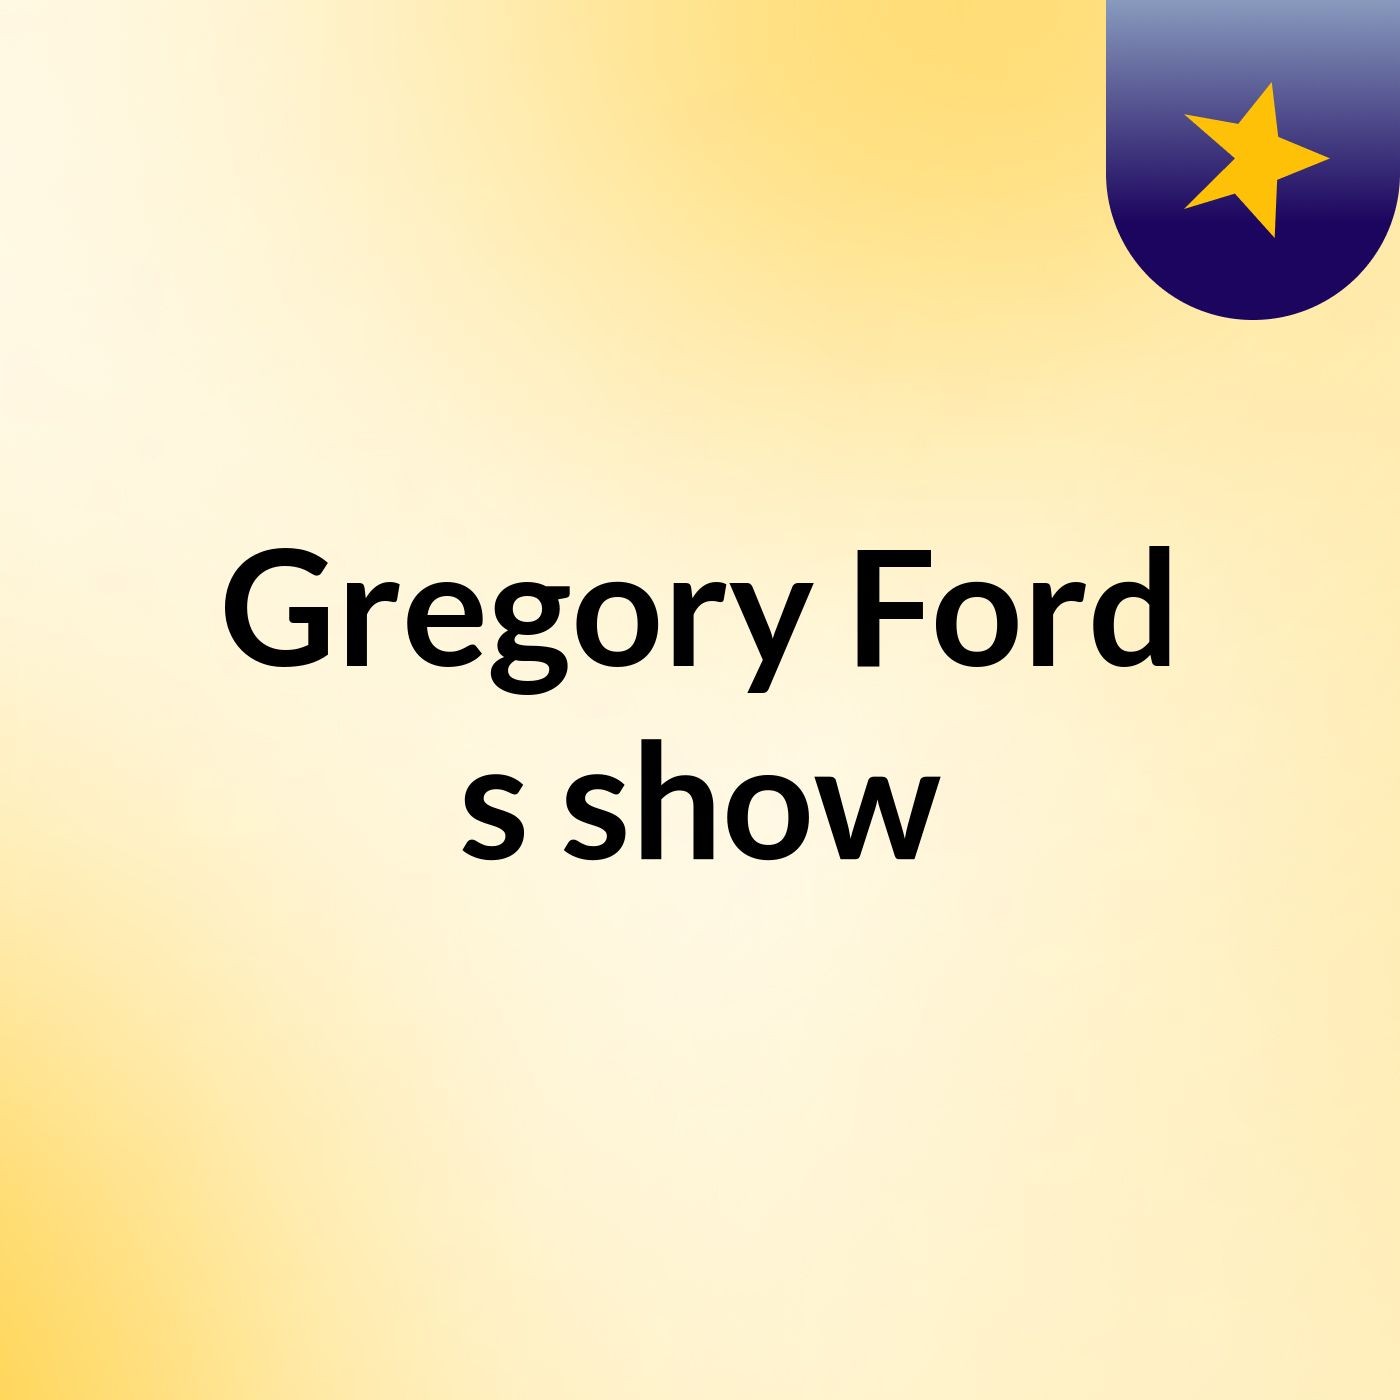 Episode 17 - Gregory Ford's show